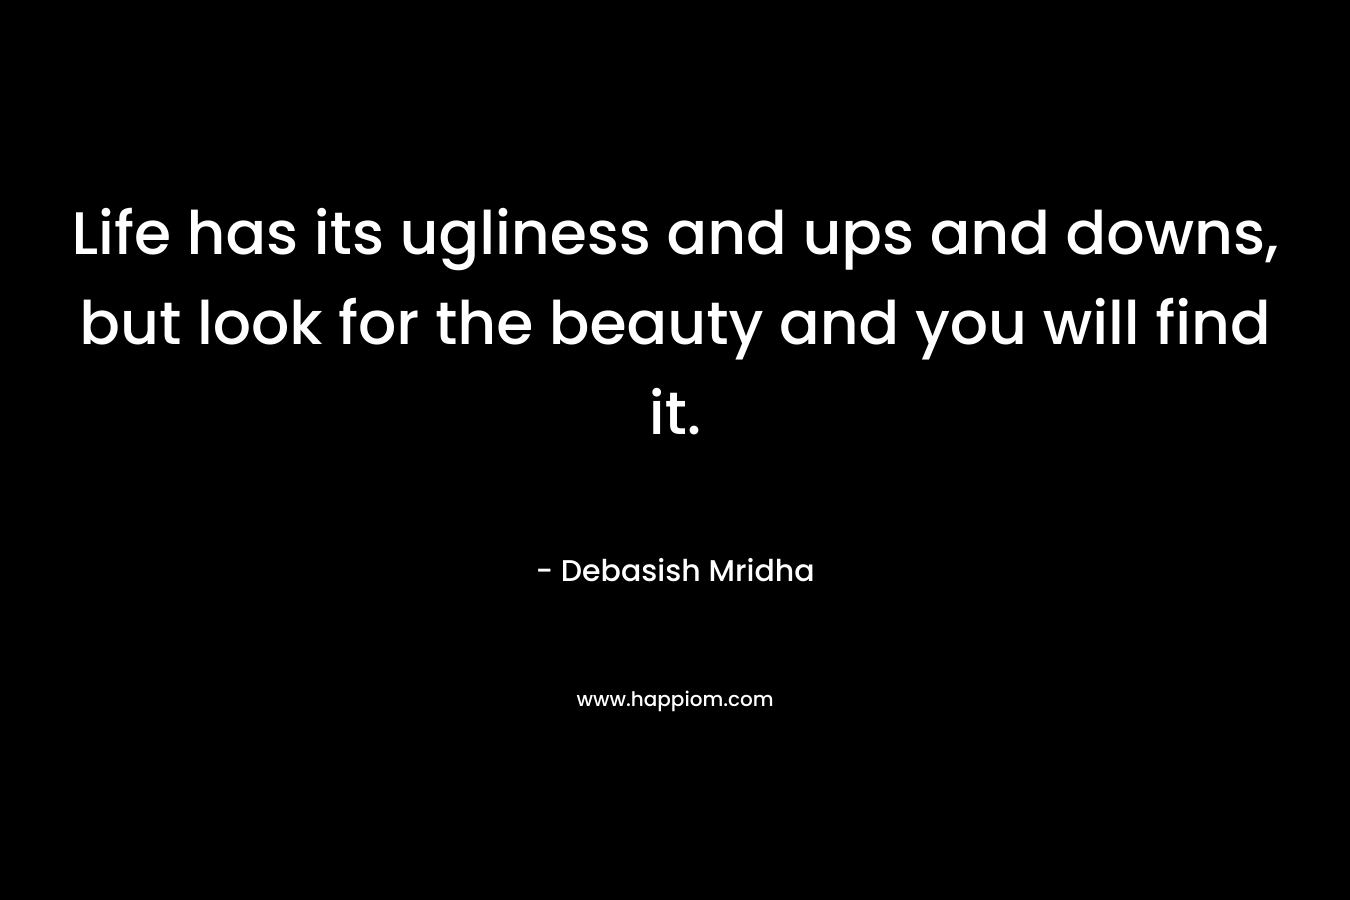 Life has its ugliness and ups and downs, but look for the beauty and you will find it.